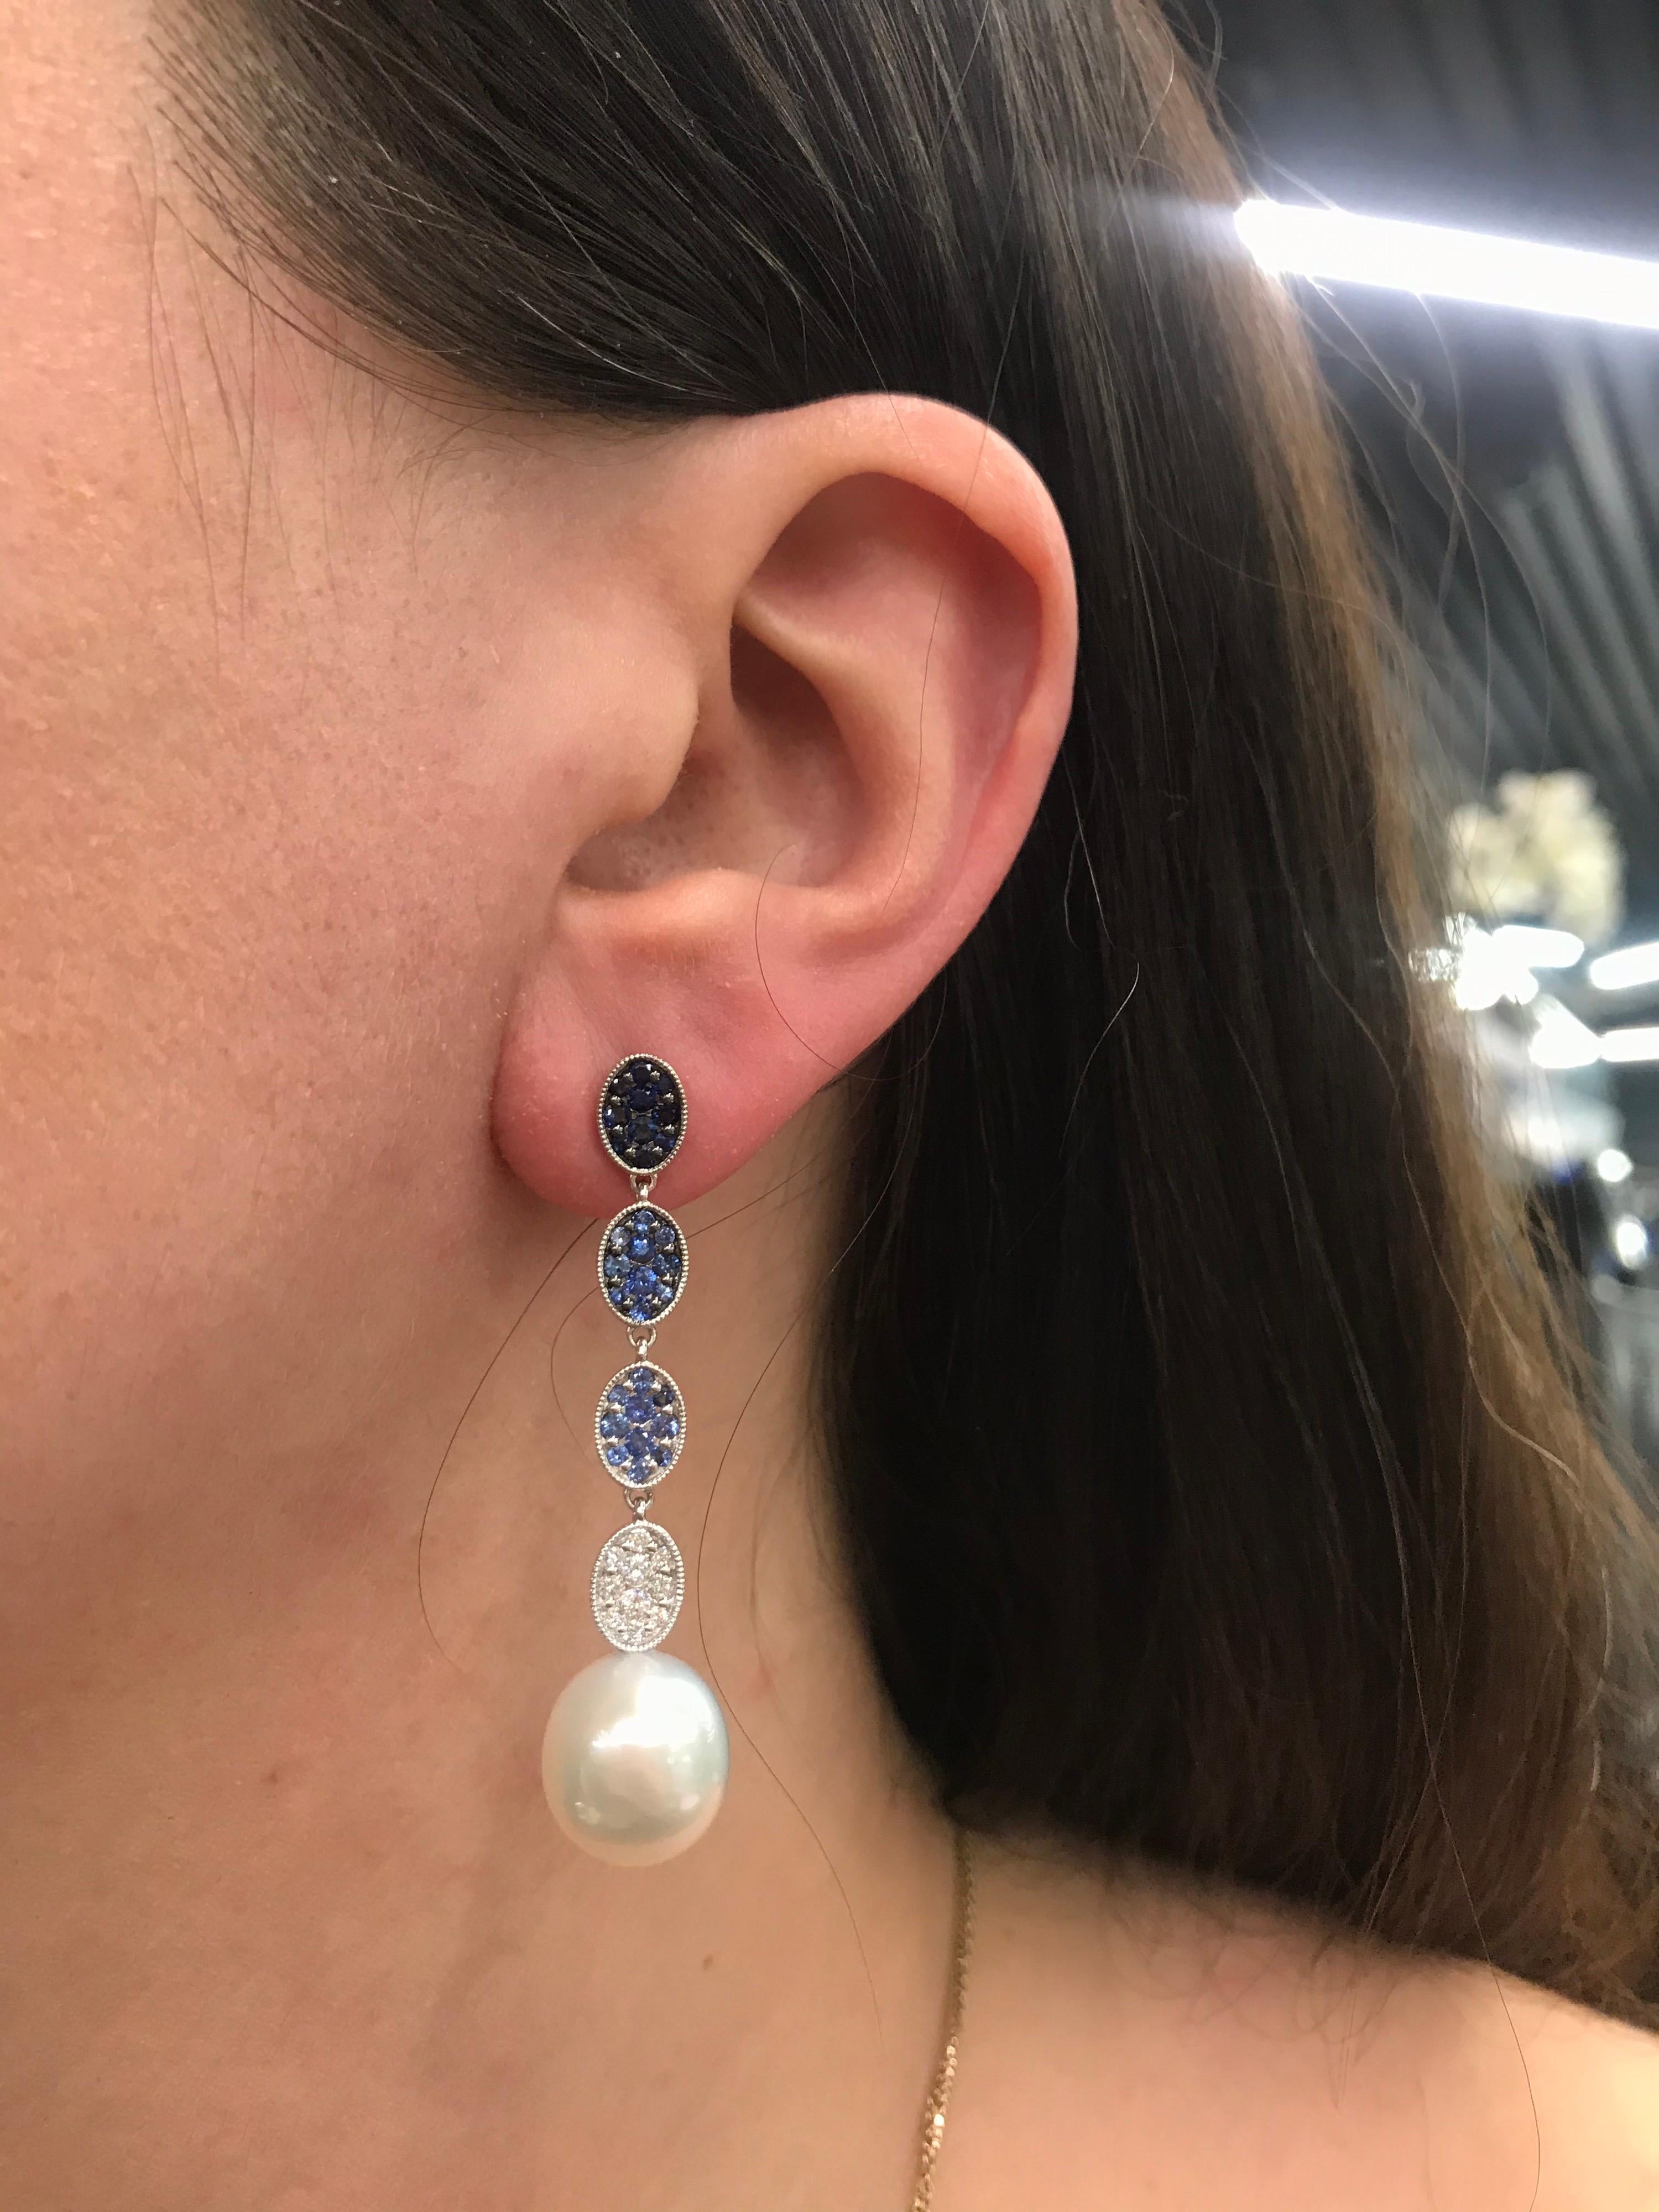 18K White gold drop earrings featuring ombree light blue to dark sapphires weighing 1.38 carats, 20 round brilliants weighing 0.34 carats and two South Sea Pearls measuring 11-12mm